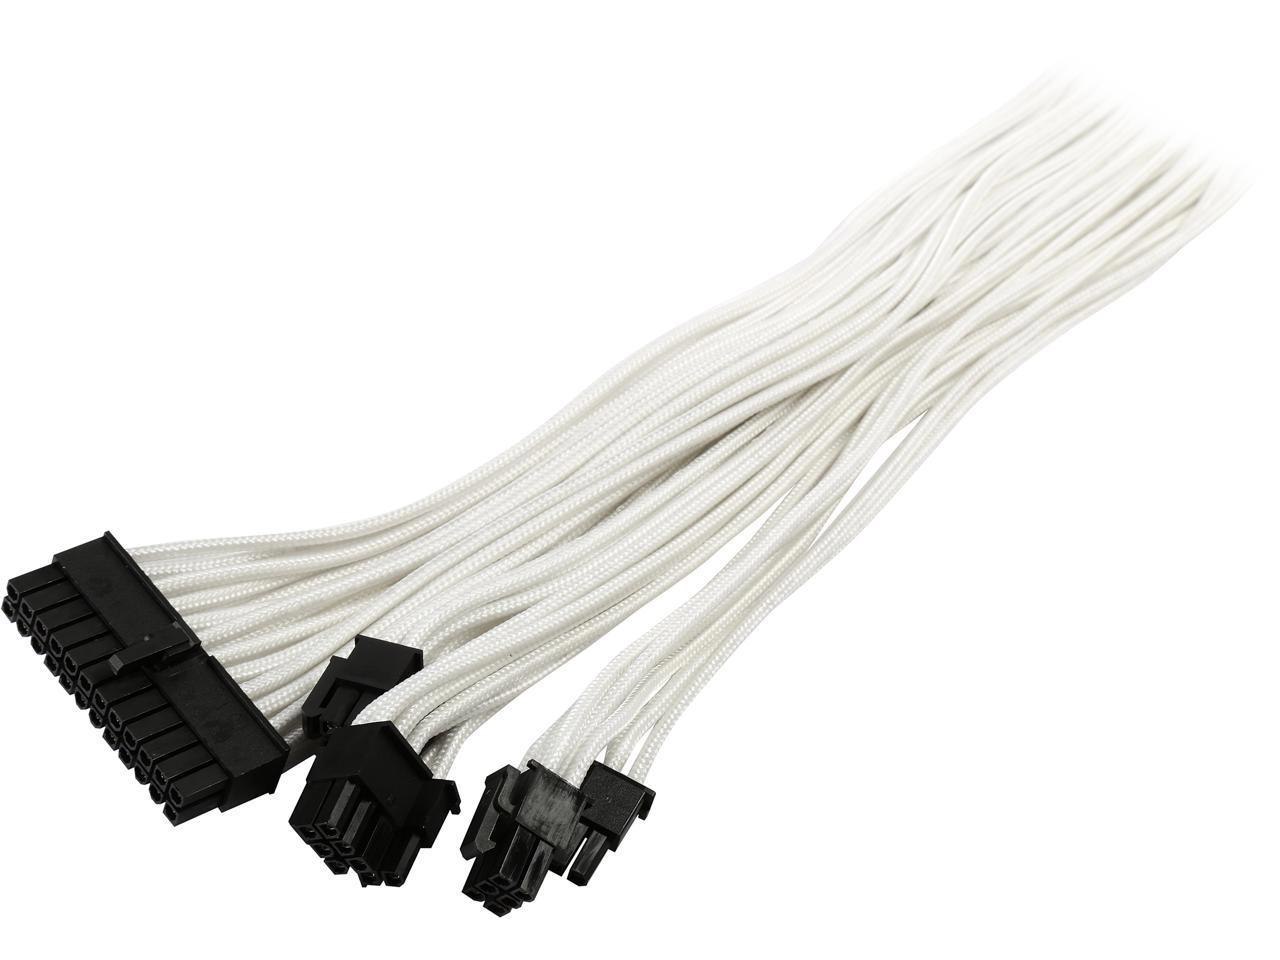 Phanteks Ph-Cb-Cmbo_Wt 1.64 FT. (0.50M) Cables - Internal Power Cables Male To Female